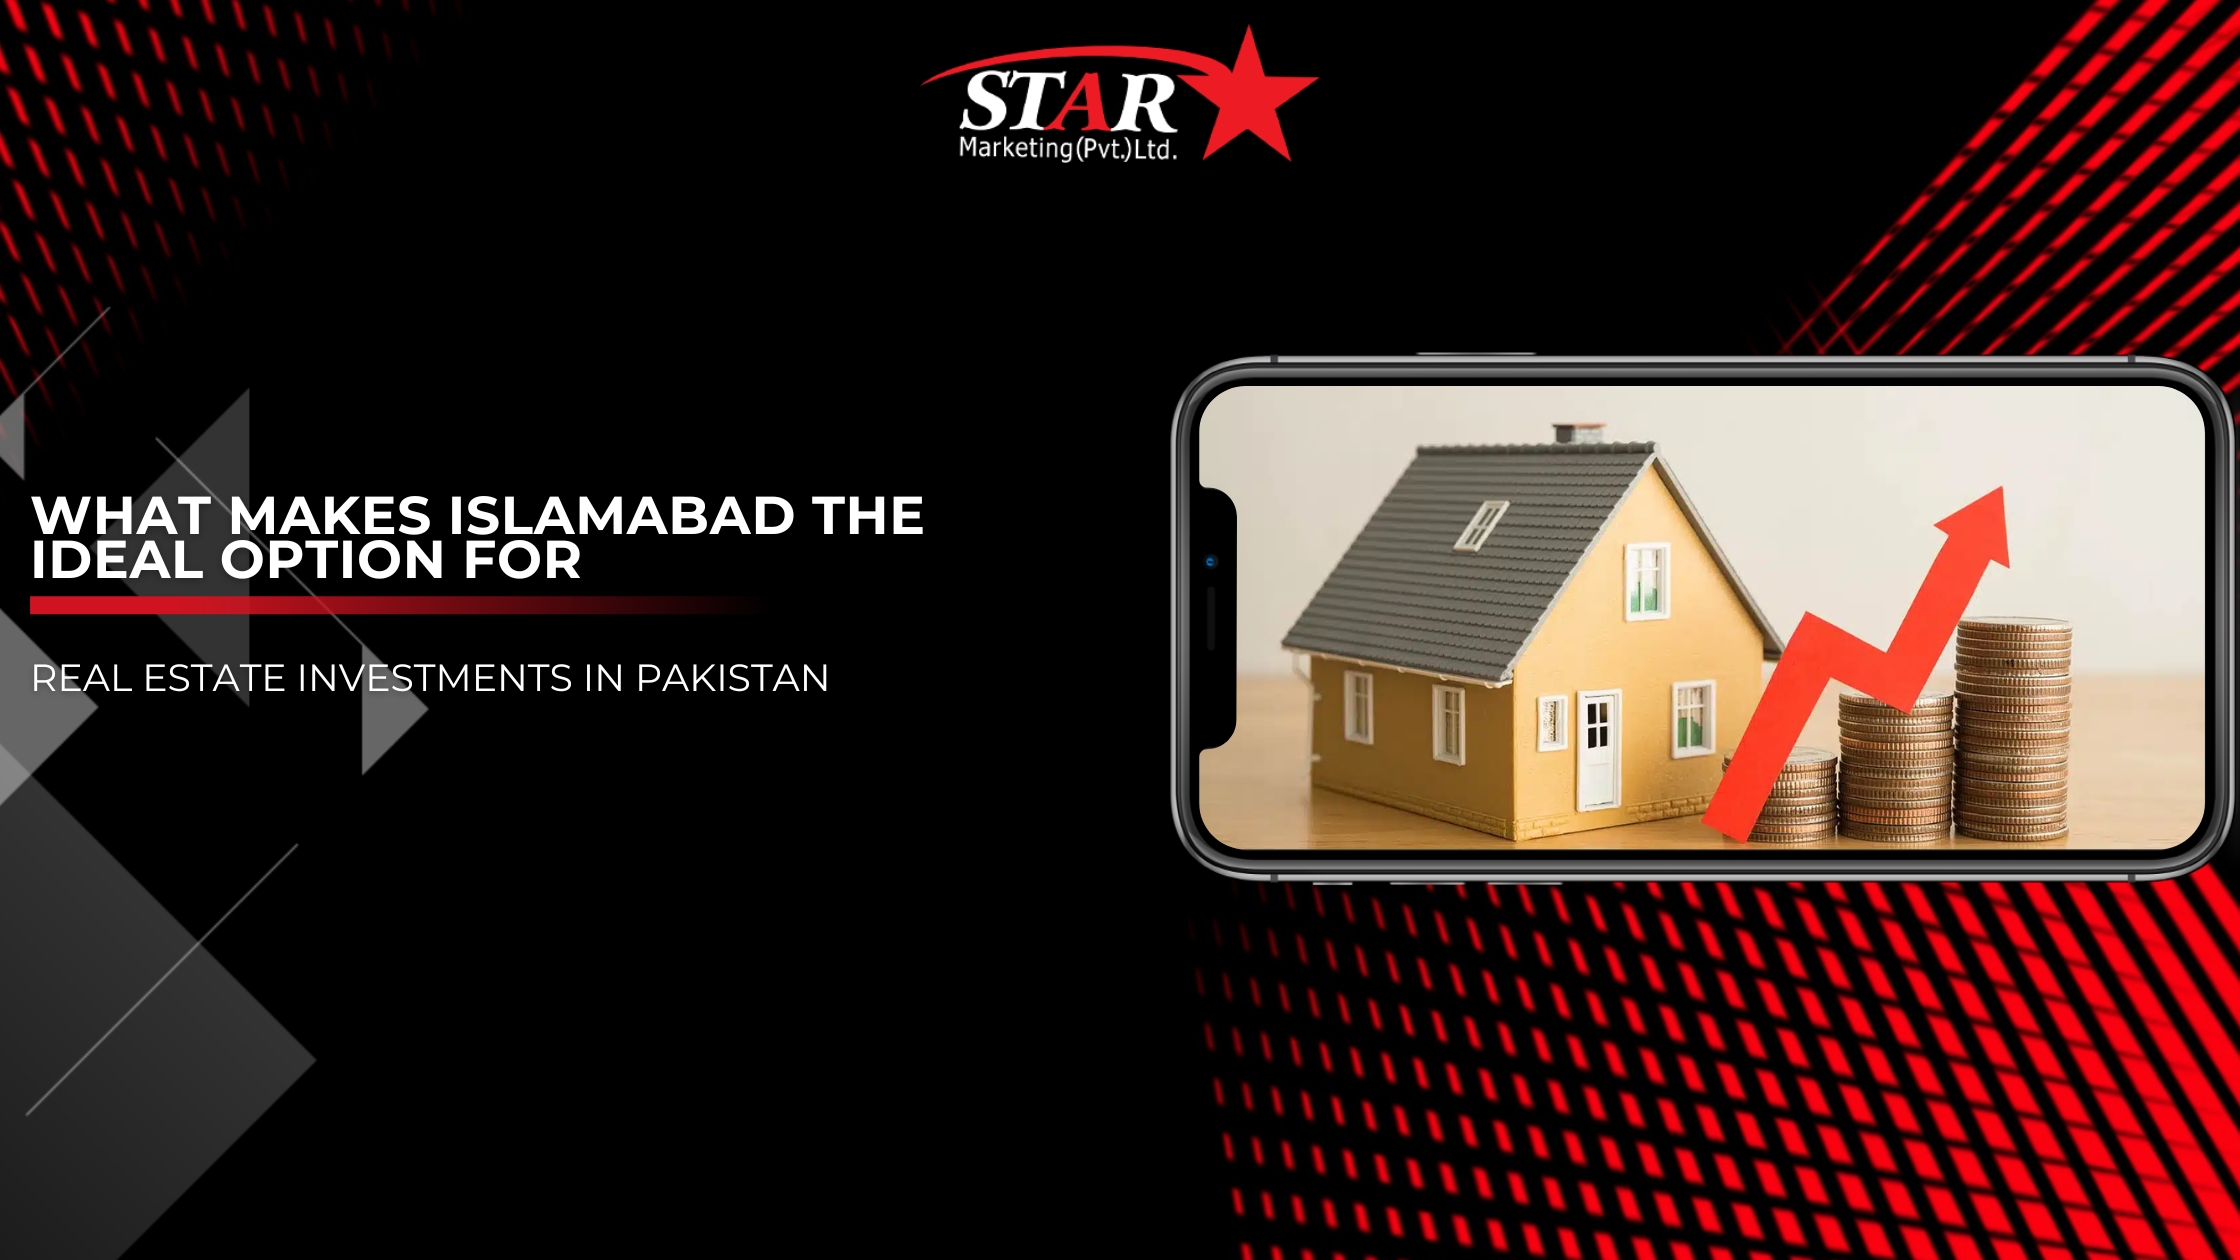 What makes Islamabad the ideal option for real estate investments in Pakistan